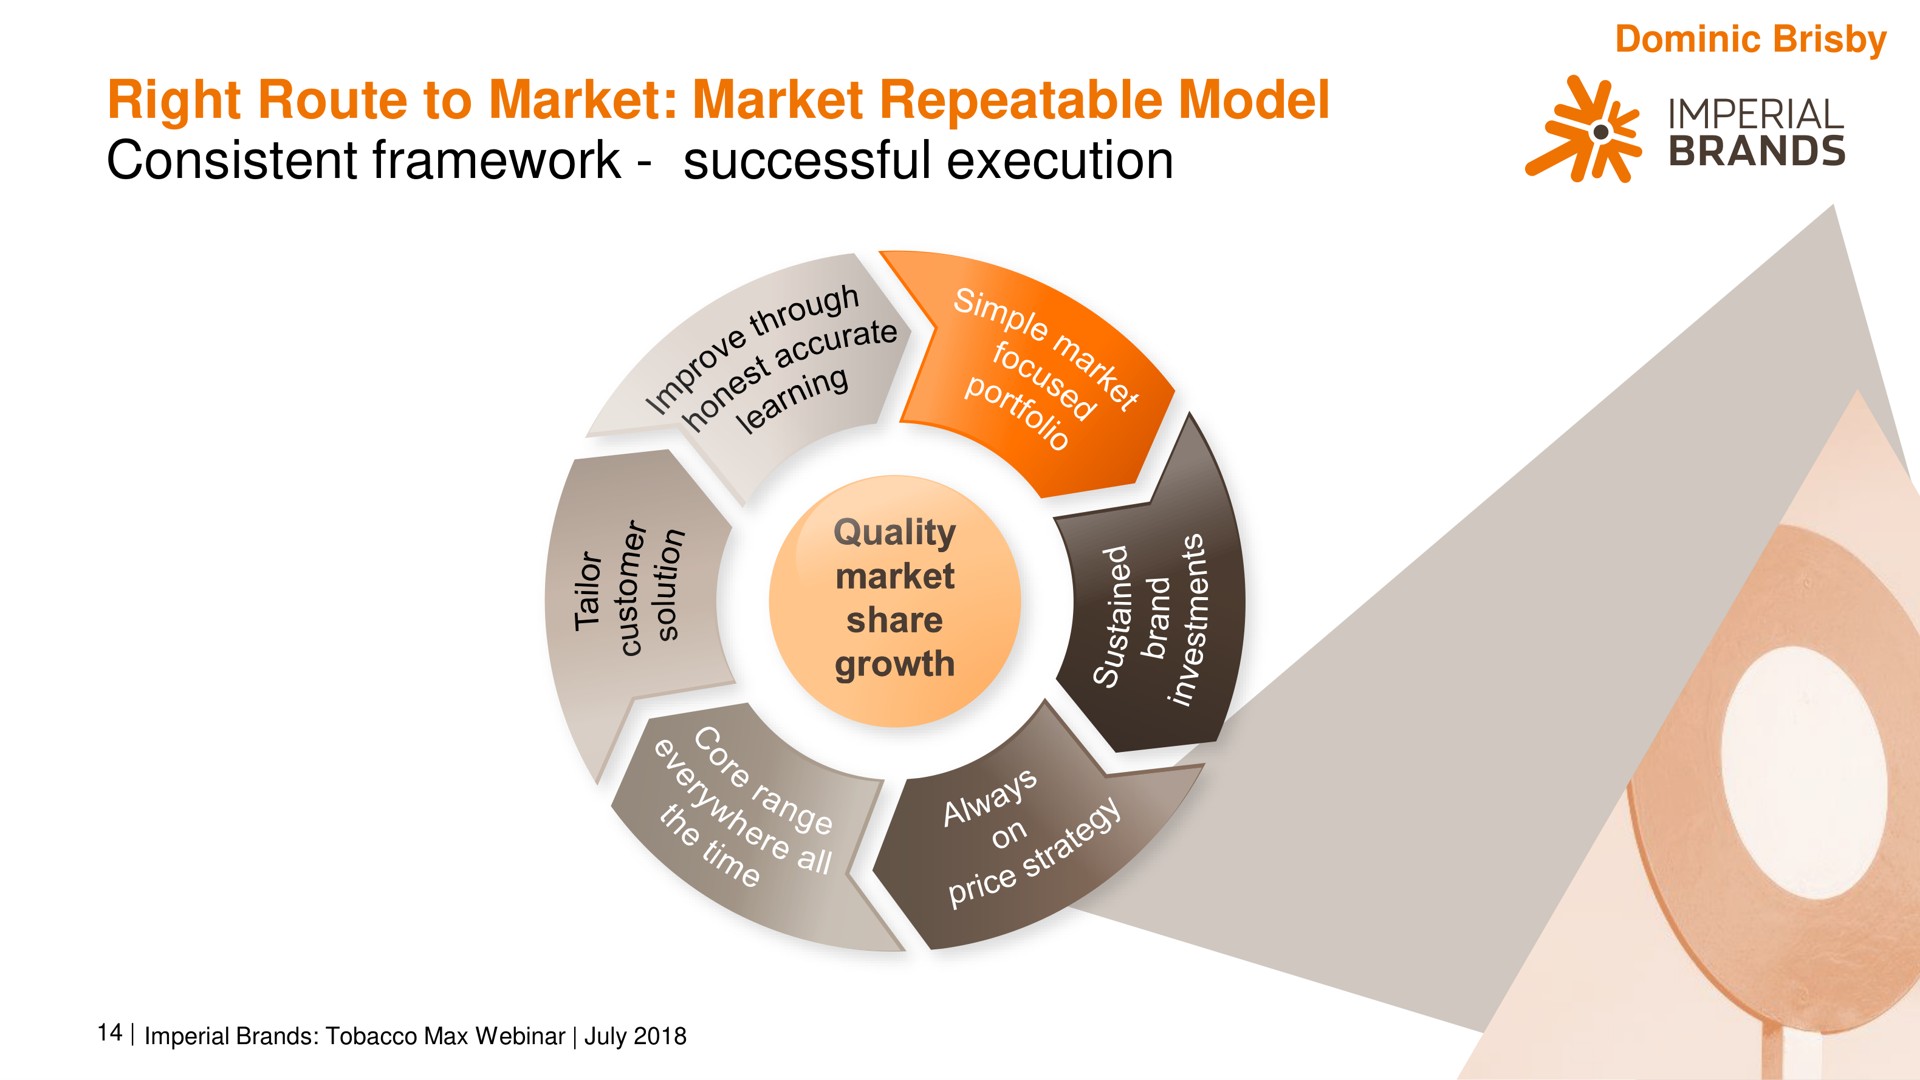 right route to market market repeatable model consistent framework successful execution me imperial an brands | Imperial Brands